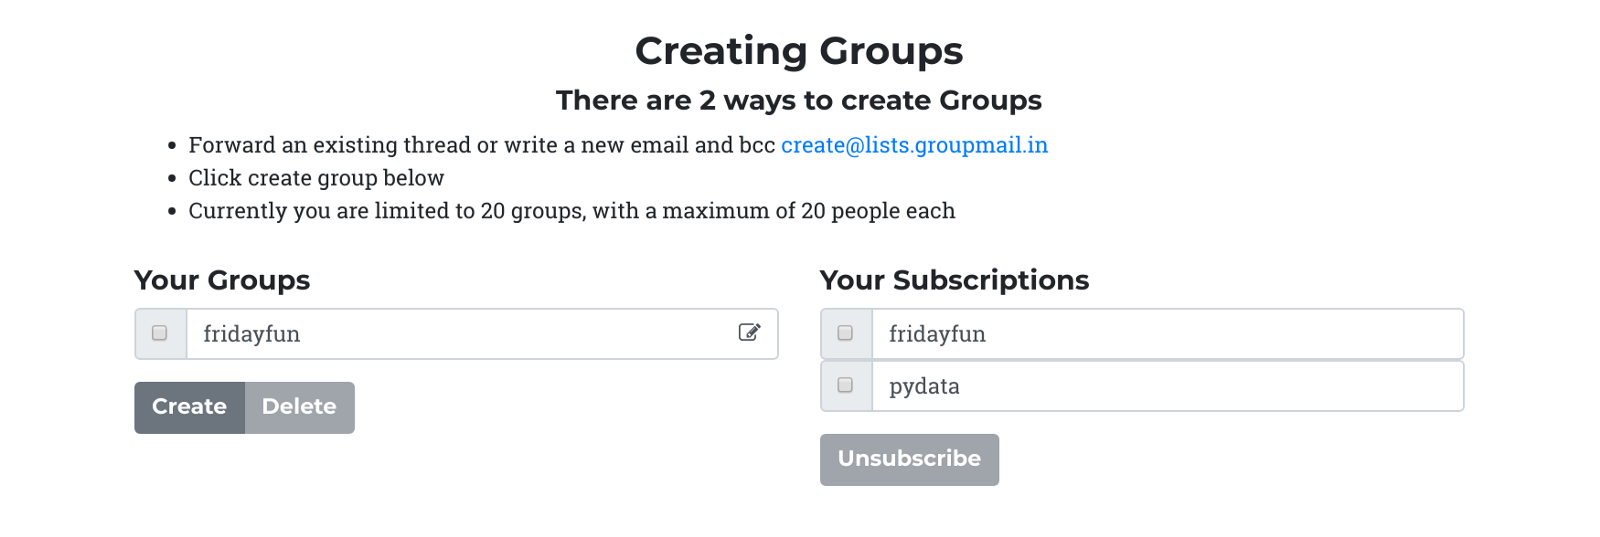 Building GroupMail, a group email service  Hacker Noon